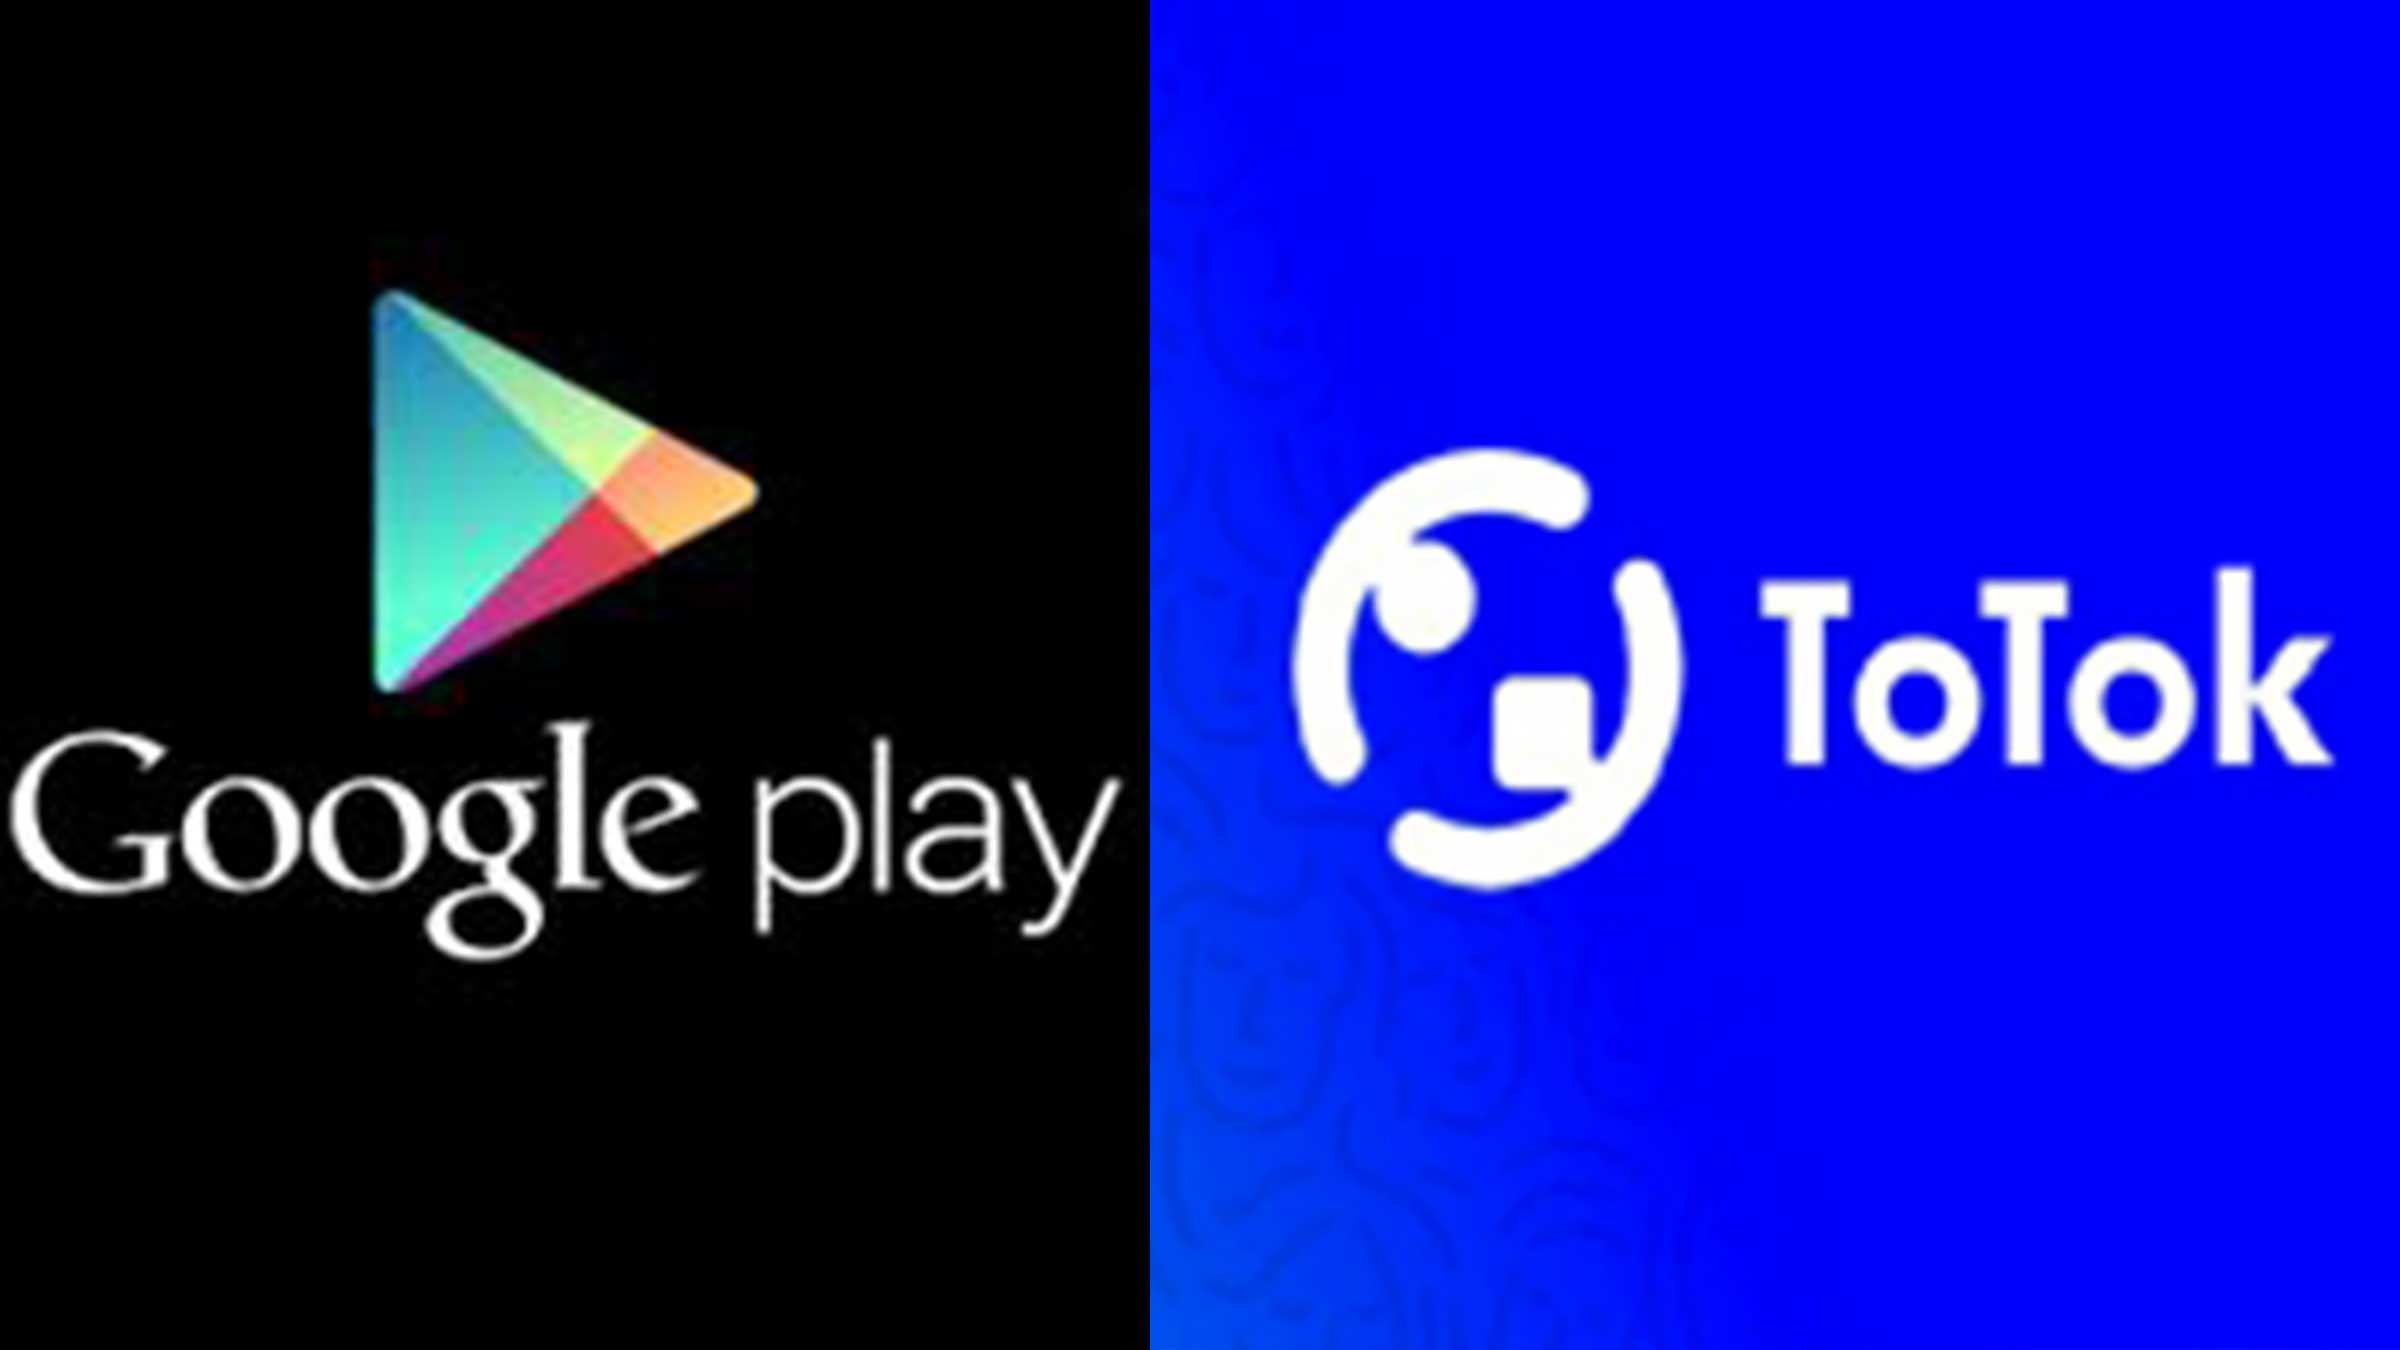 Google removes alleged spying app ToTok from Play Store for the 2nd time